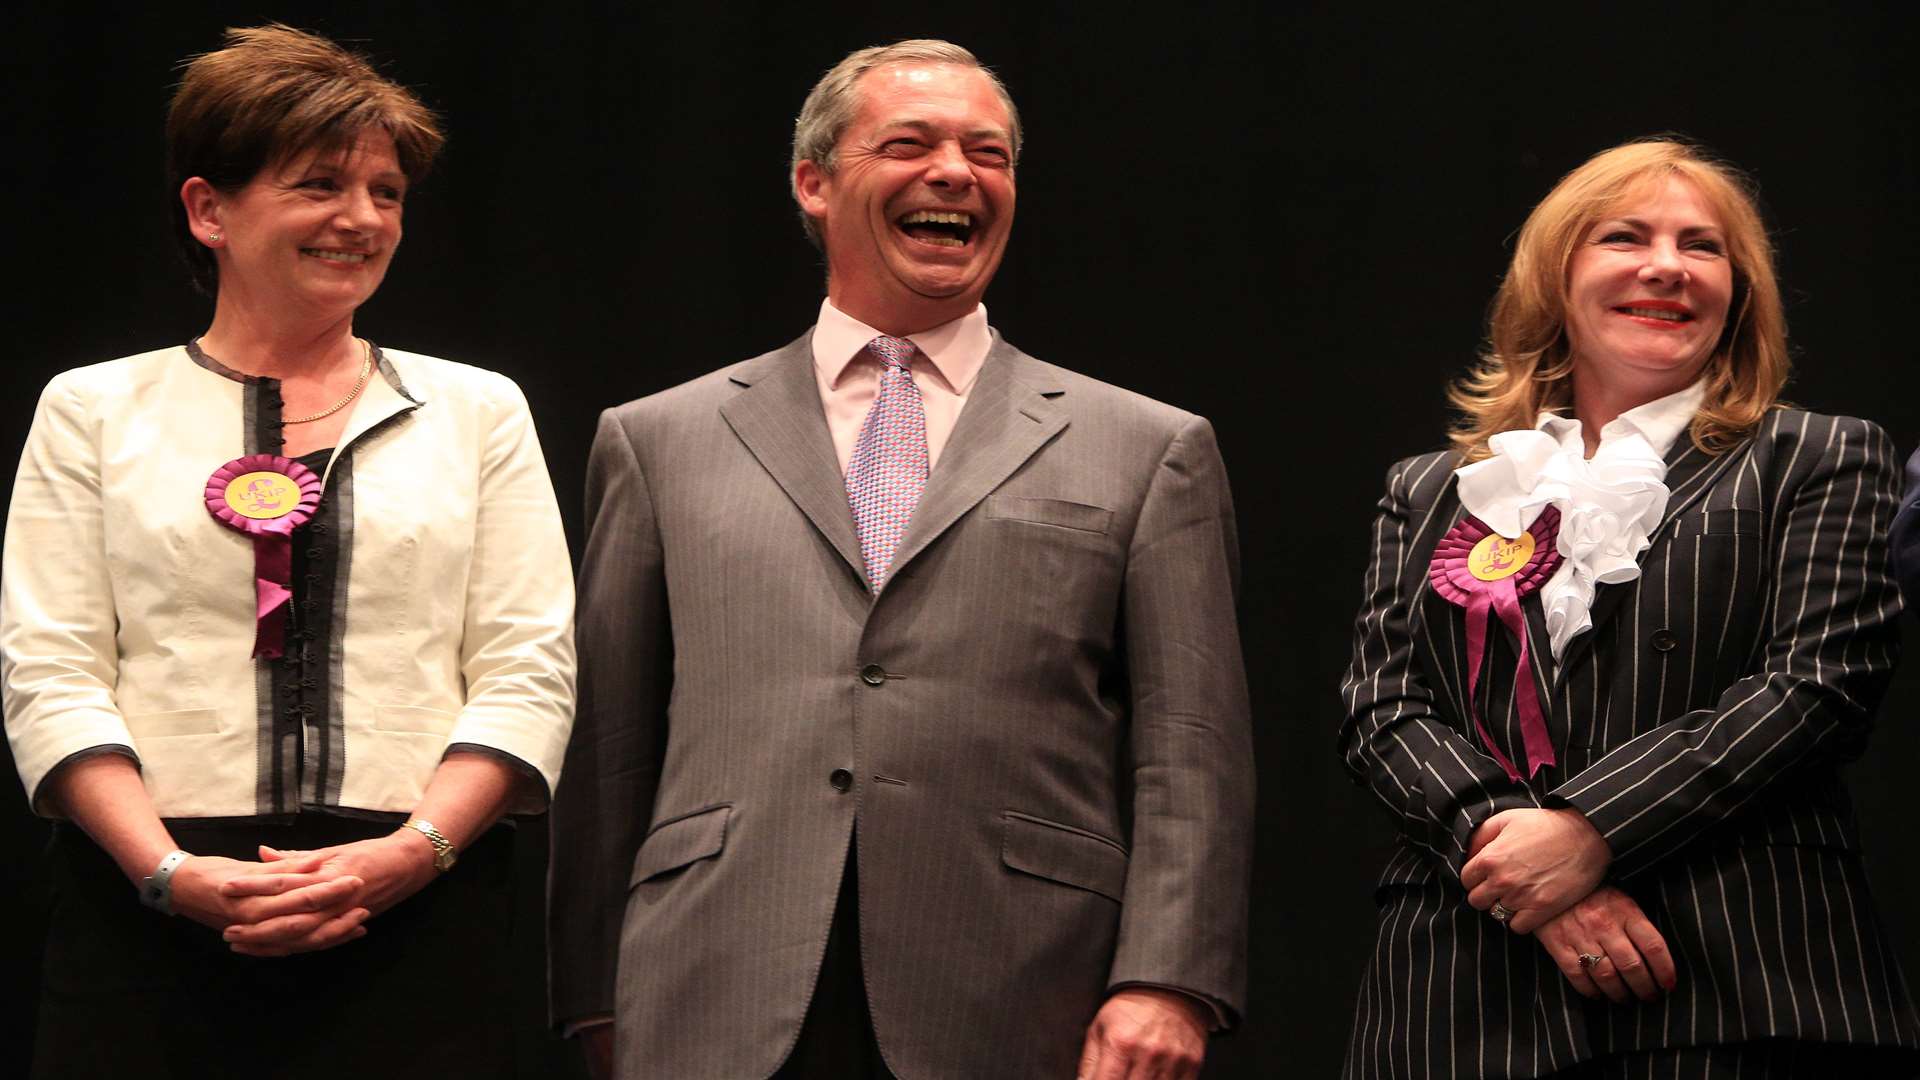 Nigel Farage with new UKIP leader Diane James. Picture: Jon Rowley/SWNS.com